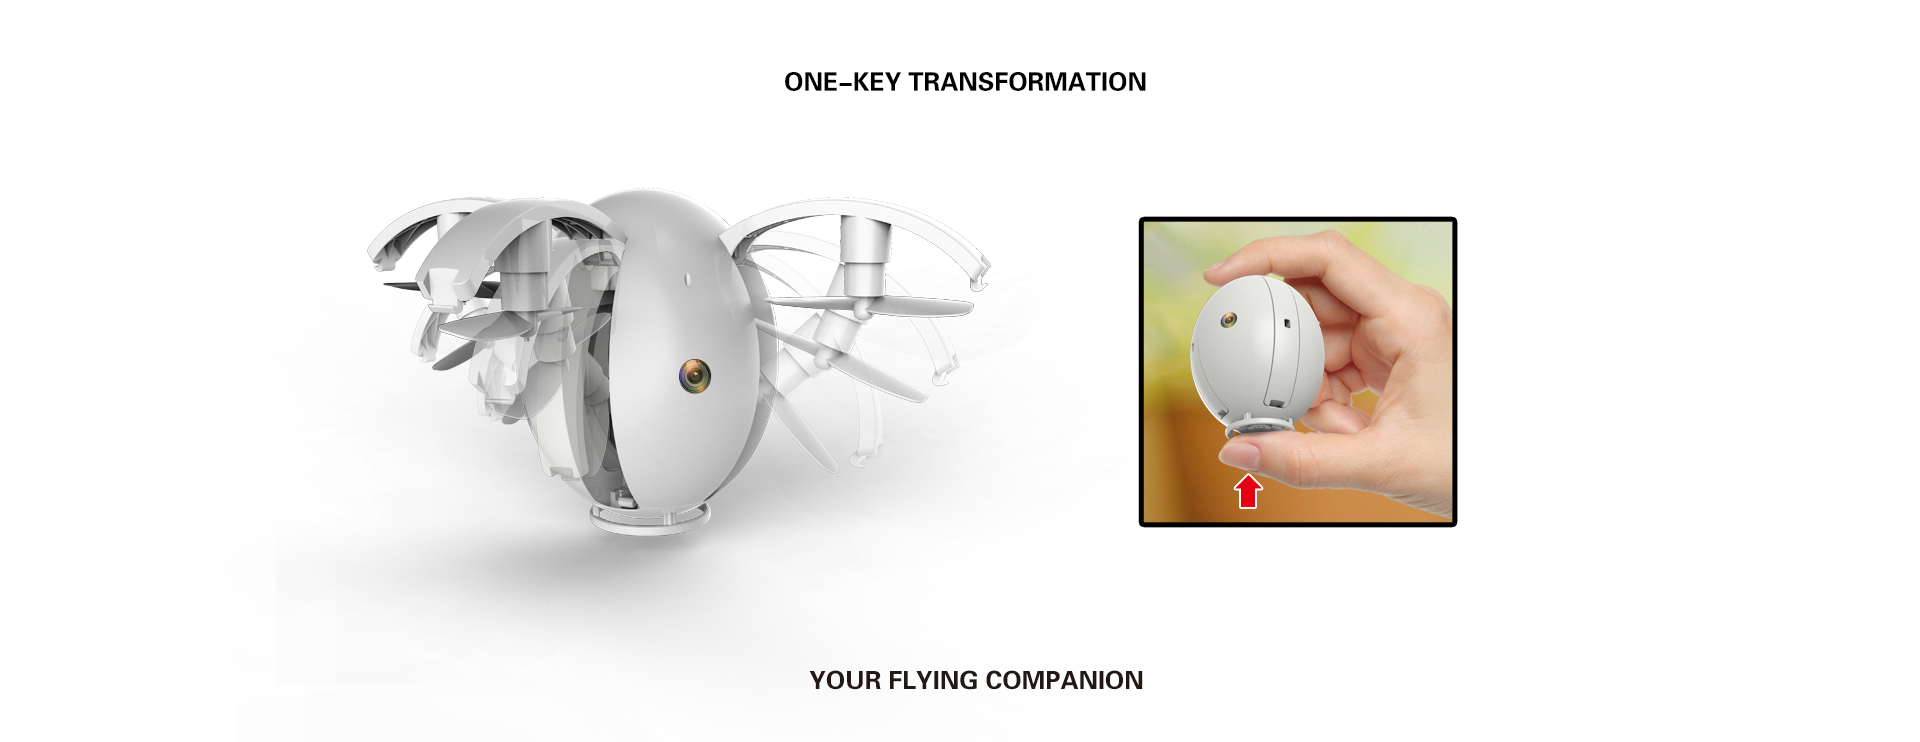 KaiDeng K130 Alpha: The Transformable Egg Drone